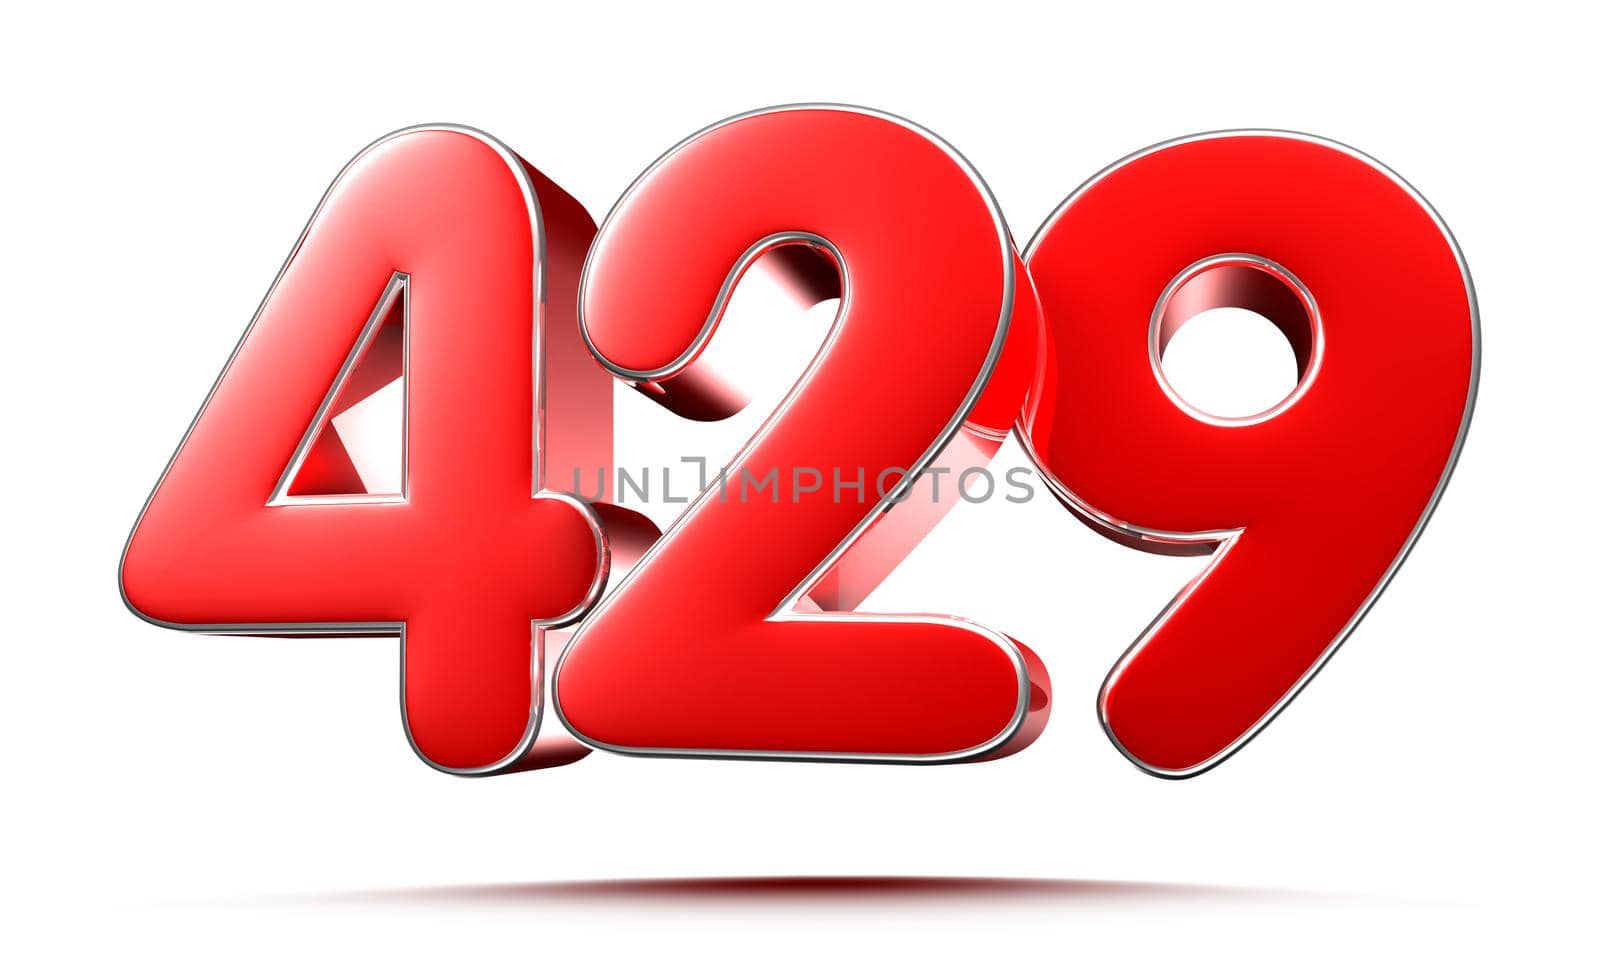 Rounded red numbers 429 on white background 3D illustration with clipping path by thitimontoyai